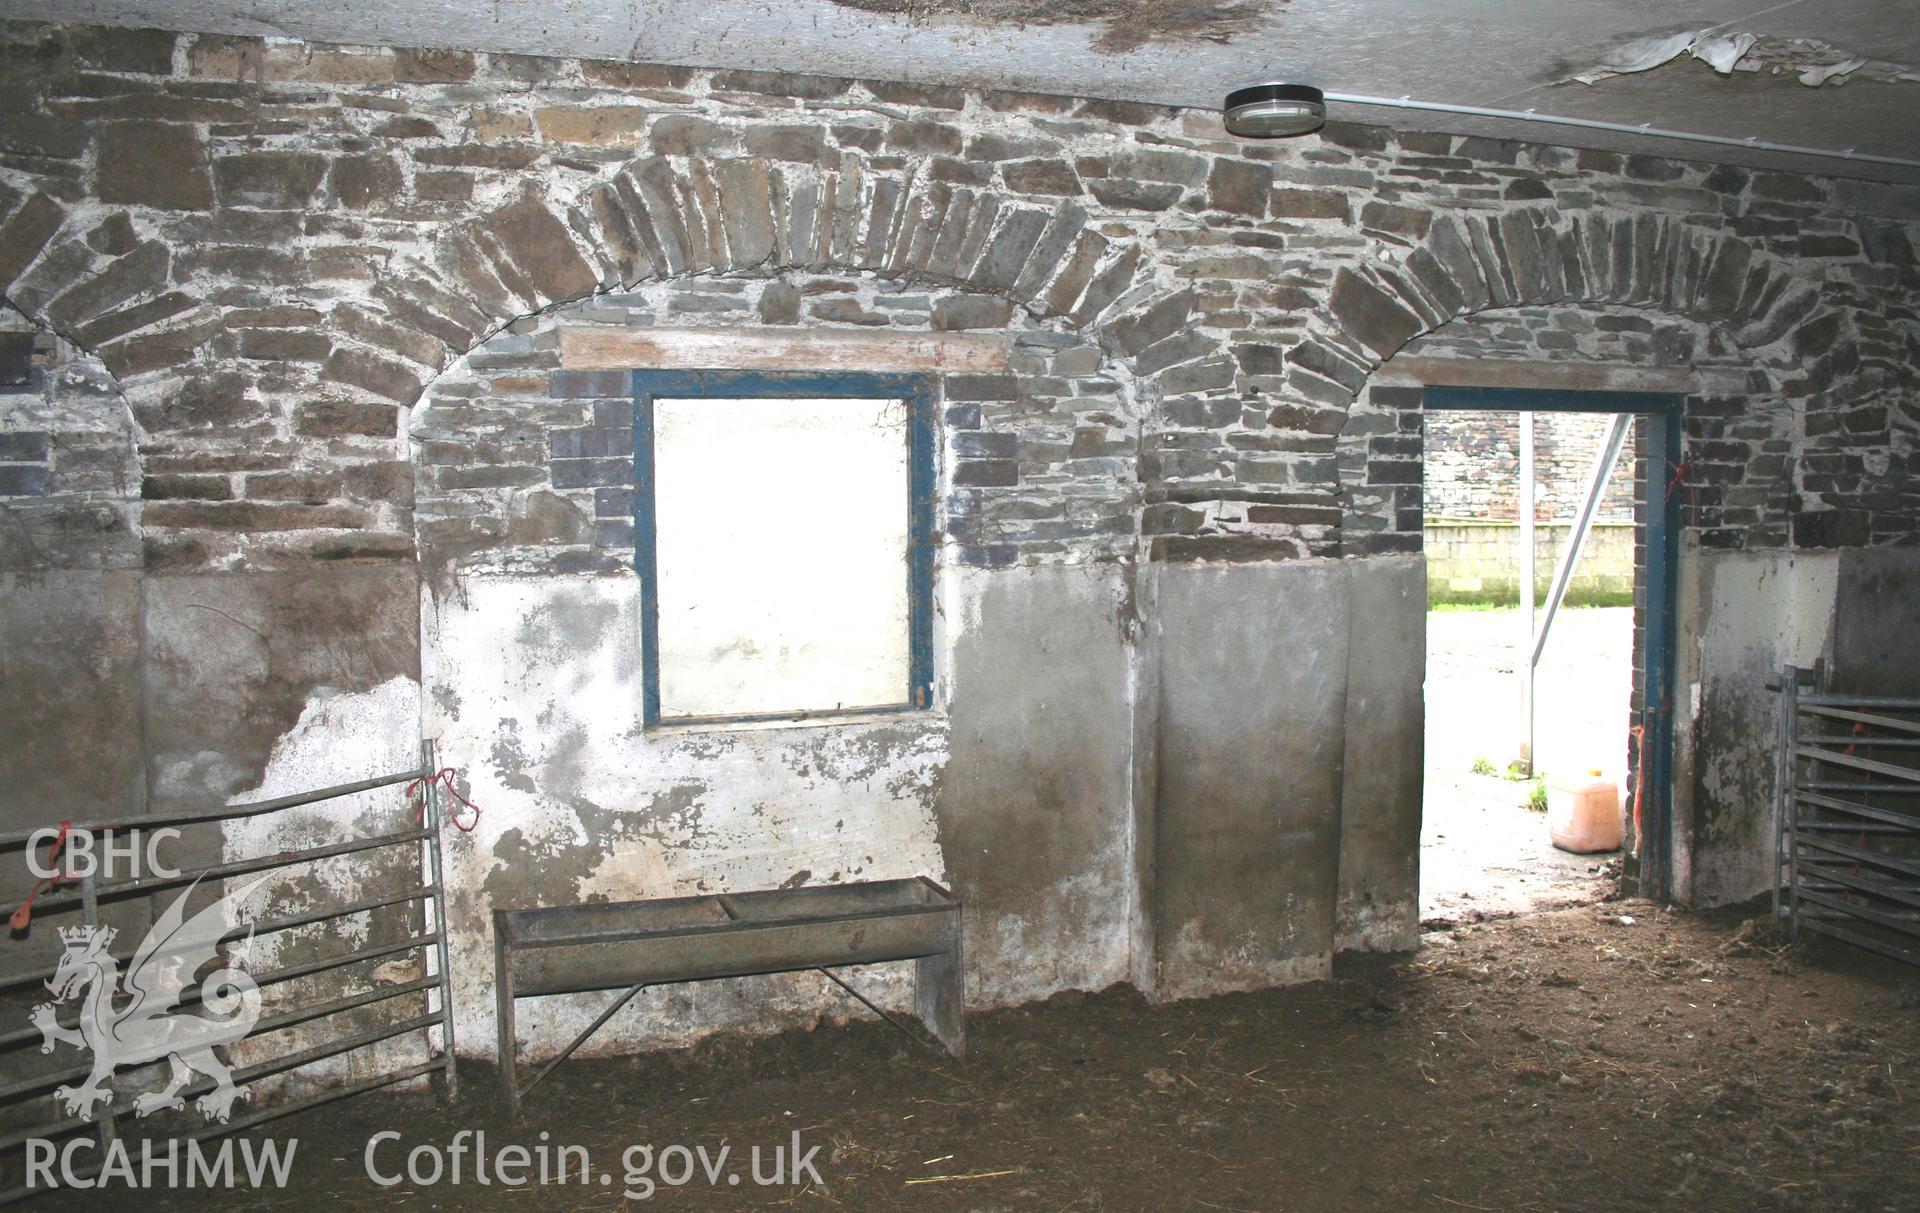 Interior view of three blocked-up stone archways. Photographic survey of the southern range of cowhouses at Tan-y-Graig Farm, Llanfarian. Conducted by Geoff Ward and John Wiles, 11th December 2006.